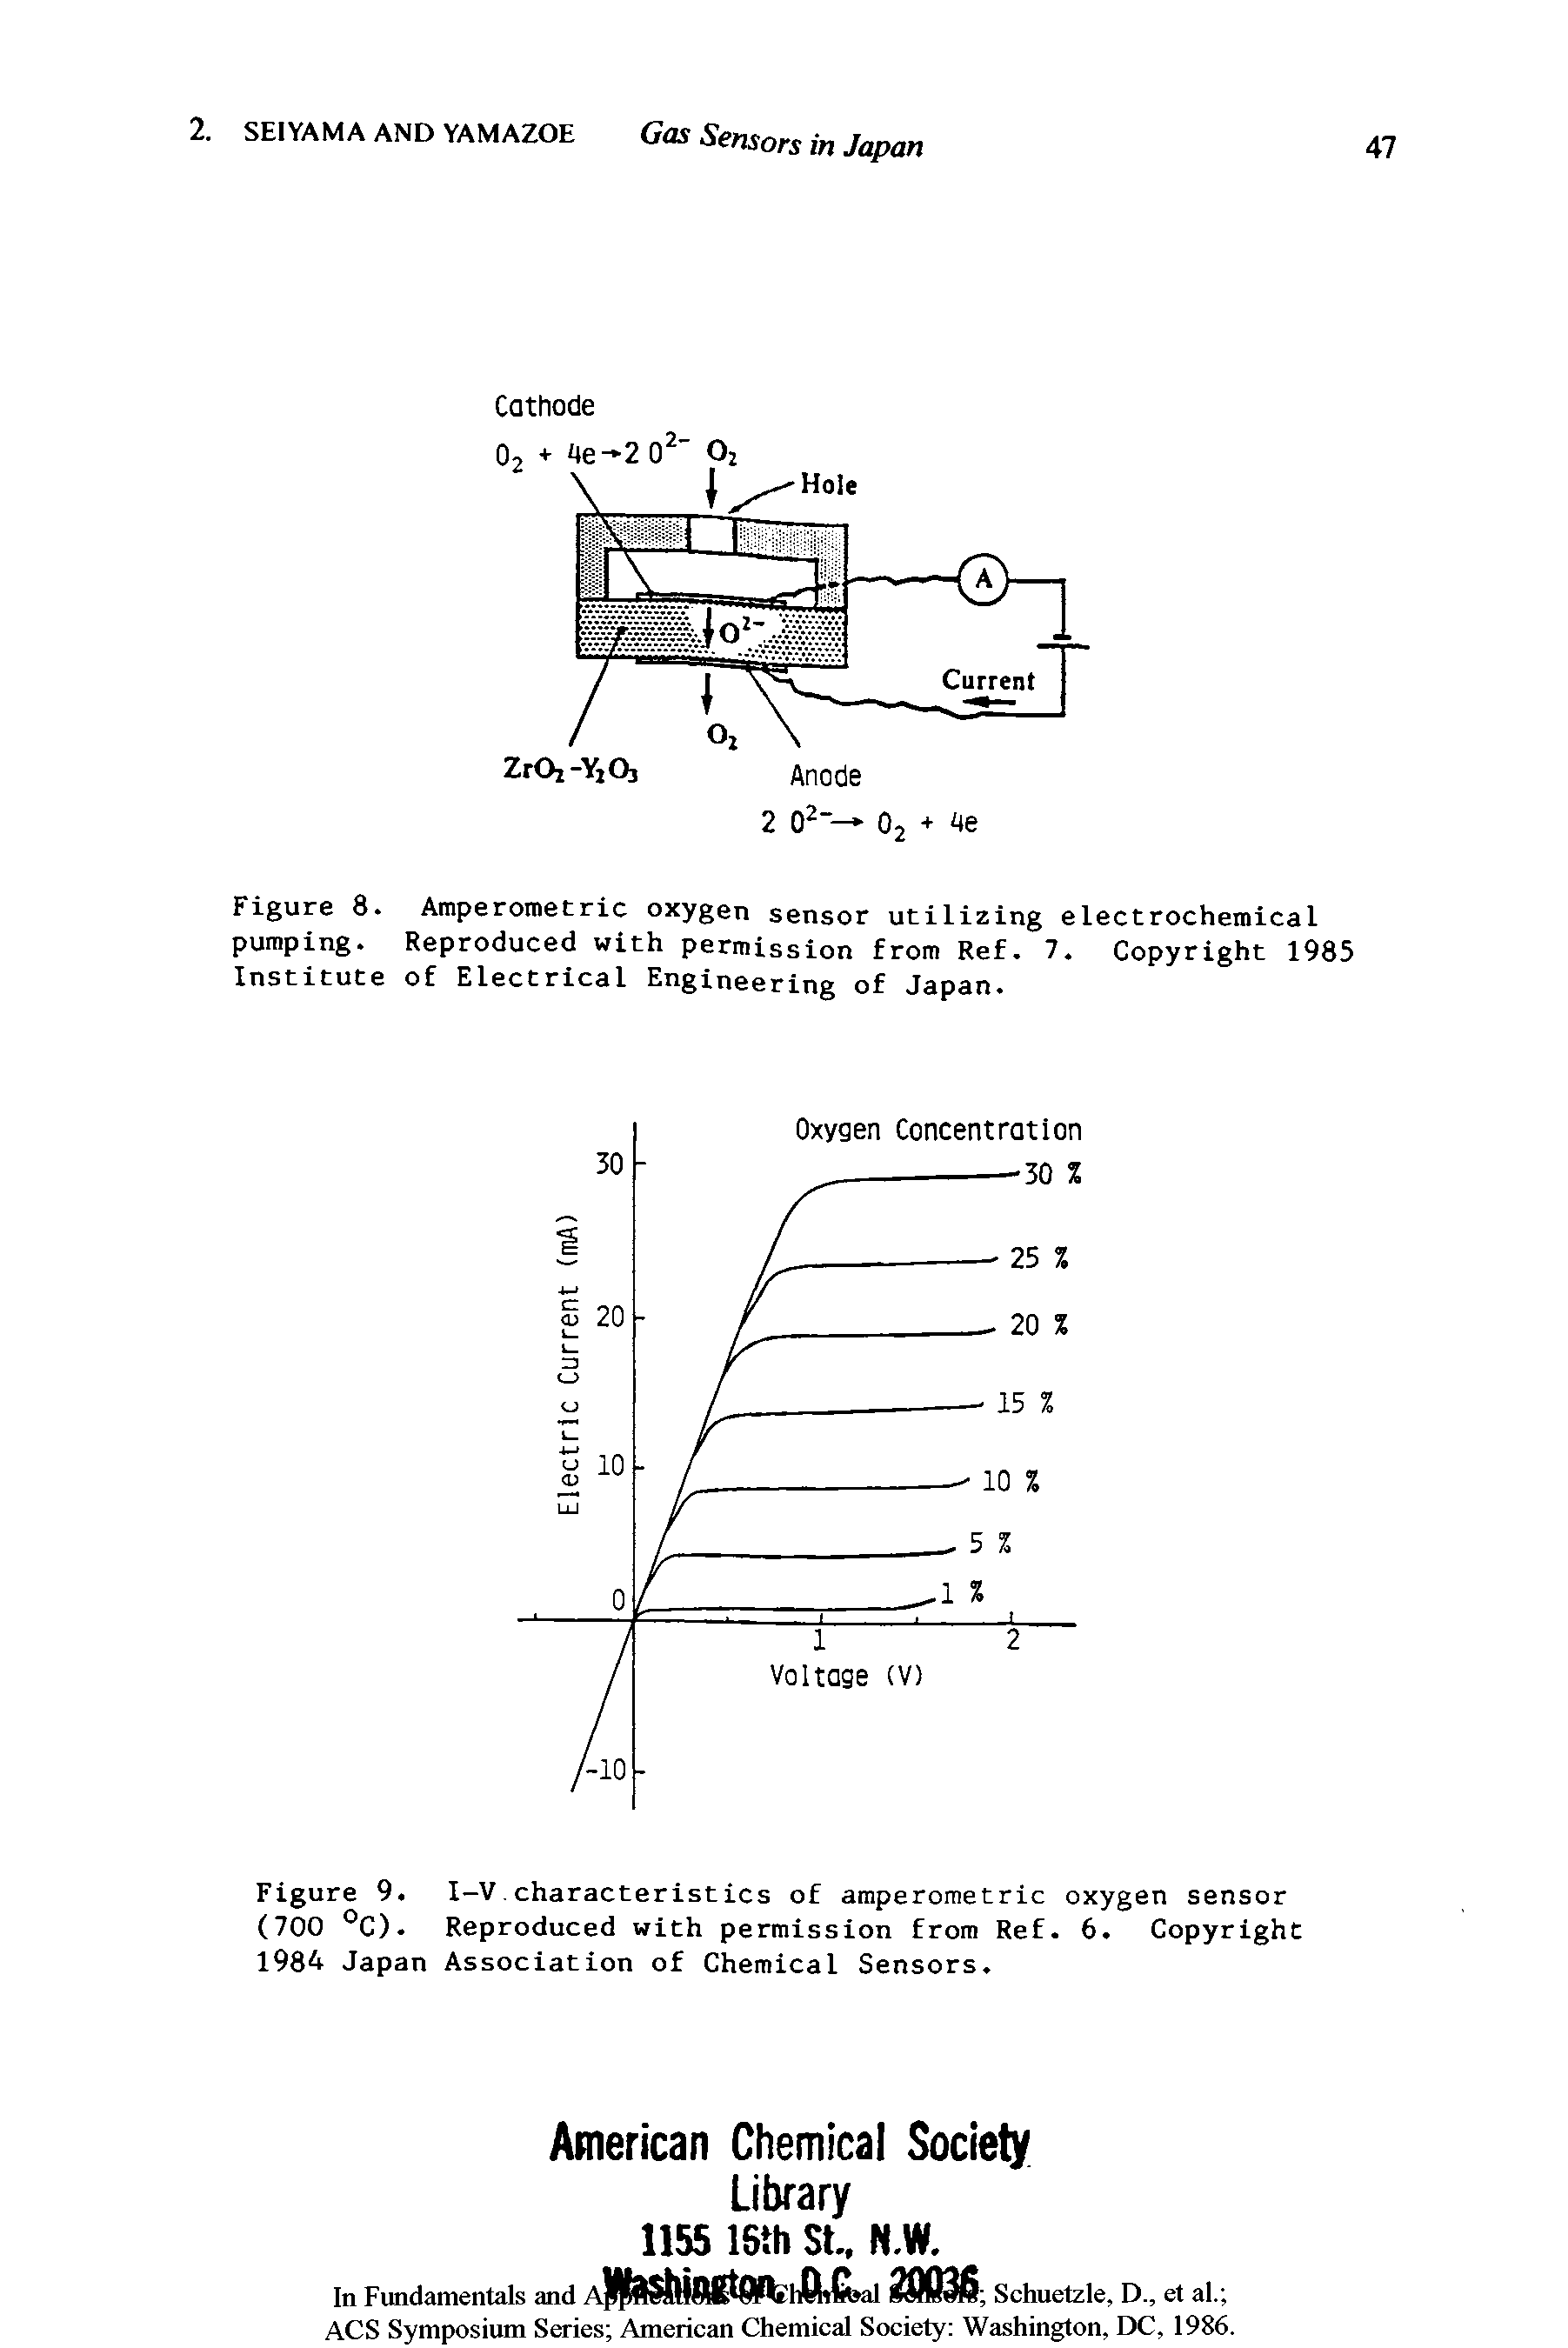 Figure 9. I-V characteristics of amperometric oxygen sensor (700 °C). Reproduced with permission from Ref. 6. Copyright 1984 Japan Association of Chemical Sensors.